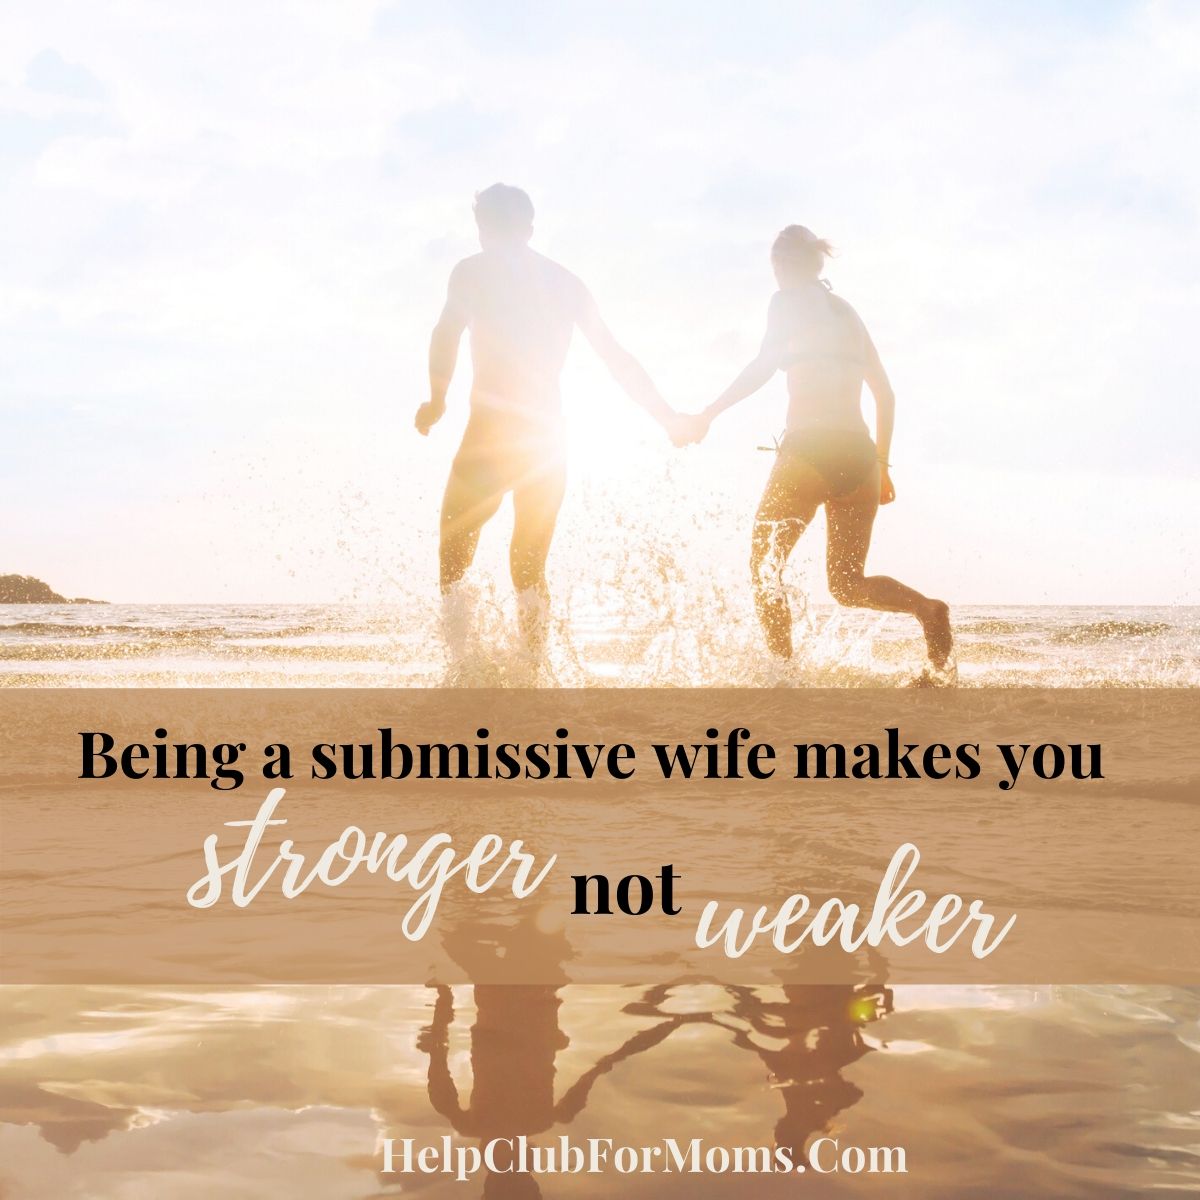 Being A Submissive Wife Makes You Stronger Not Weaker Help Club for Moms pic